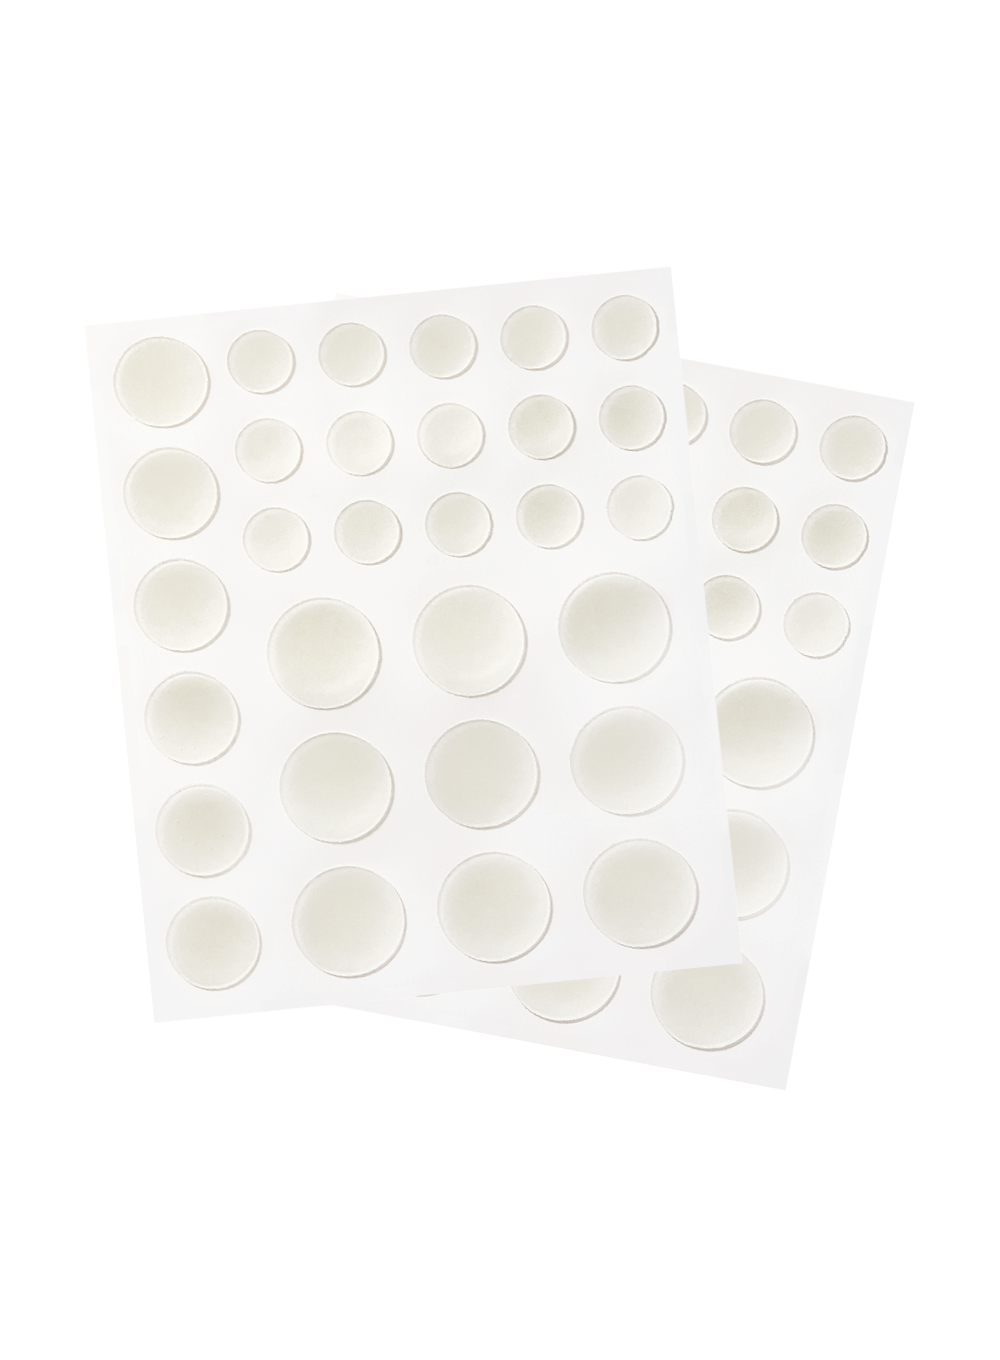 Sheets of the Peach Slices Acne Spot Dots, with 30 spots in various sizes per sheet